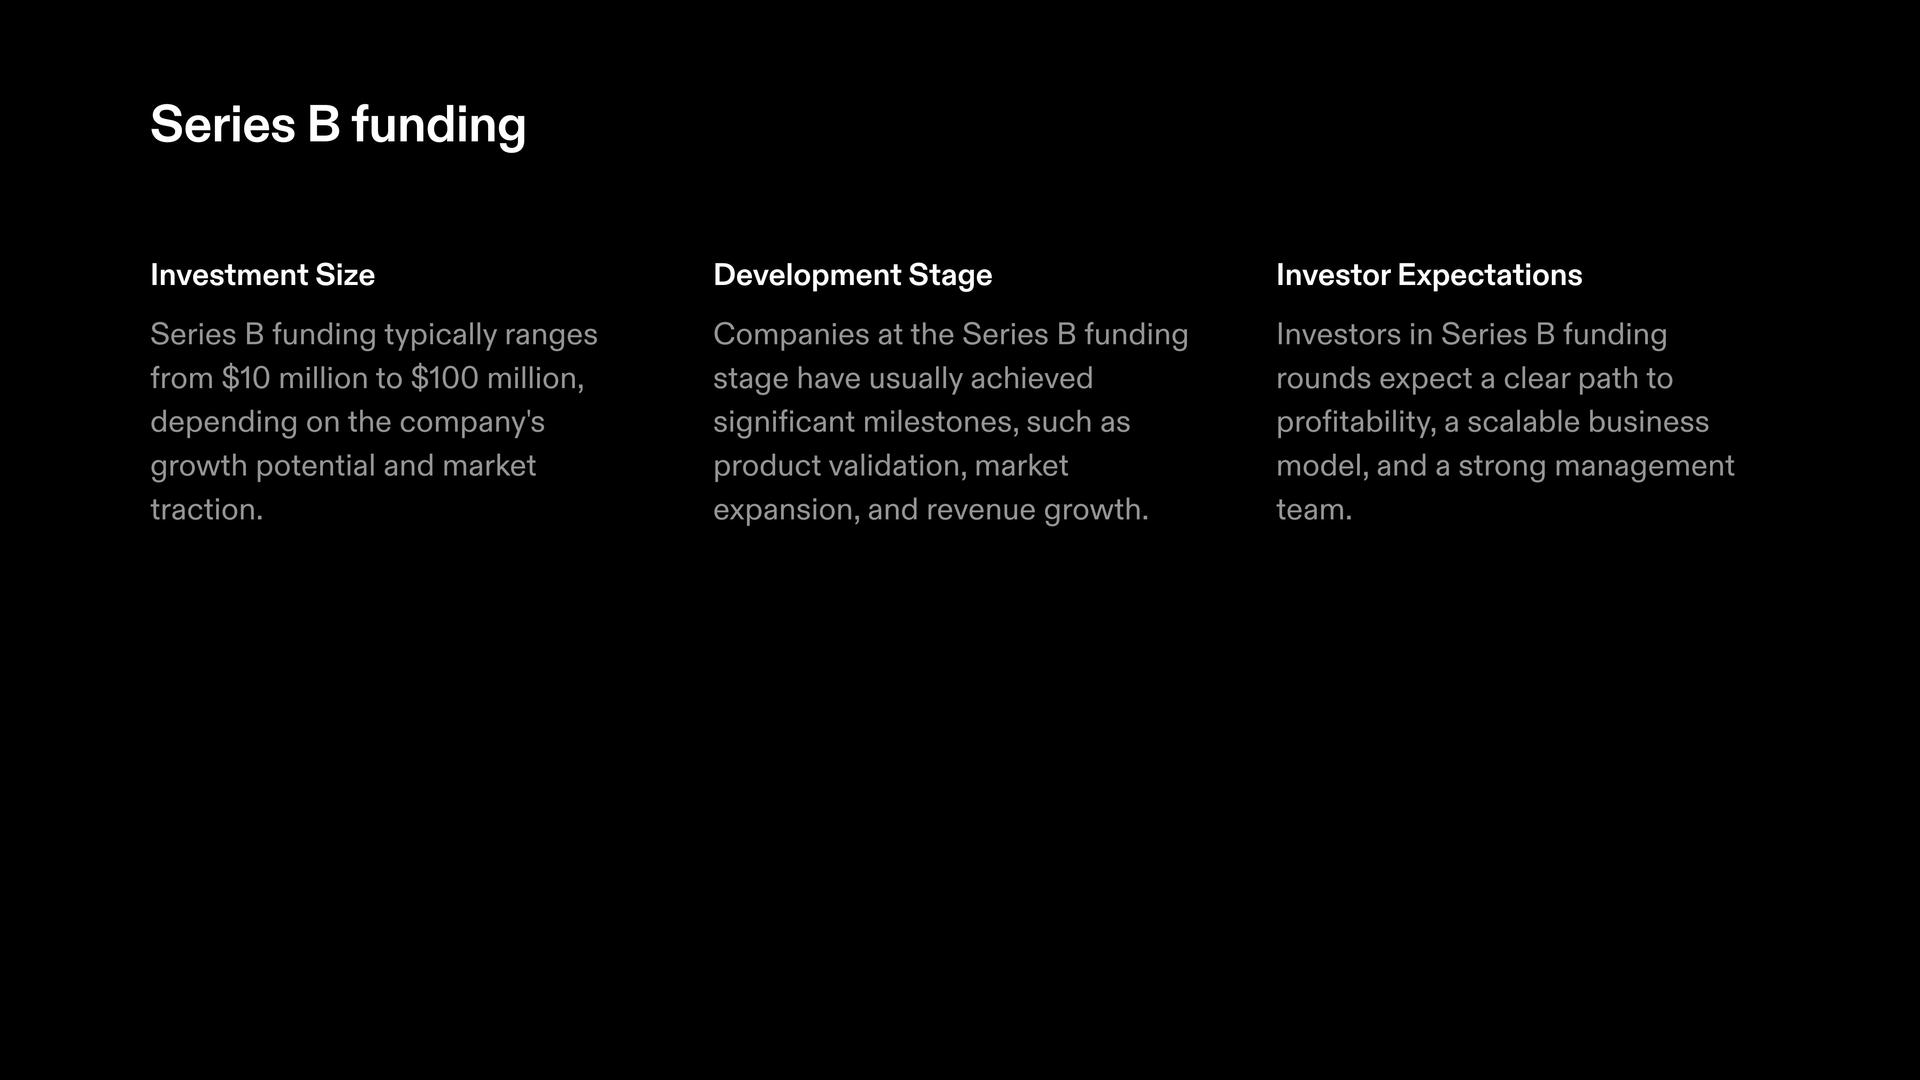 Series B Startup Funding: Investment size, development stage and investor expectations